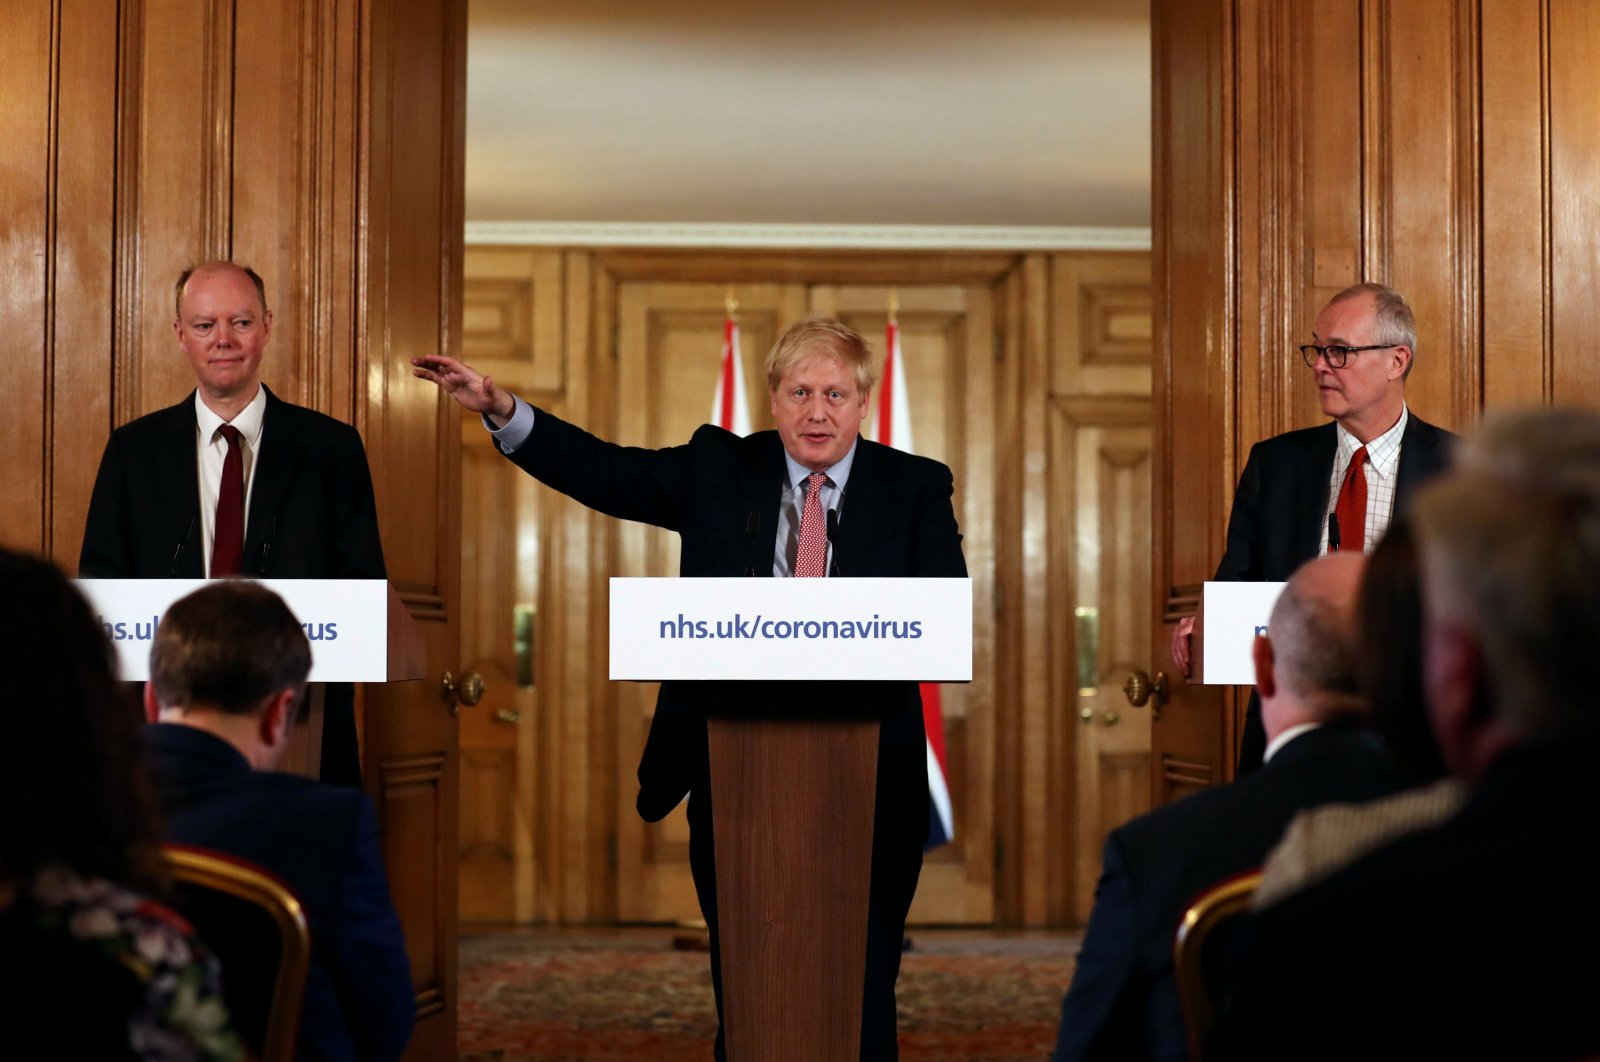 British Prime Minister Boris Johnson, Chief Medical Officer for England, Chris Whitty and Government Chief Scientific Adviser, Sir Patrick Vallance attend a news conference addressing the government's response to the coronavirus outbreak, at Downing Street in London, Britain March 12, 2020. (Reuters Photo)